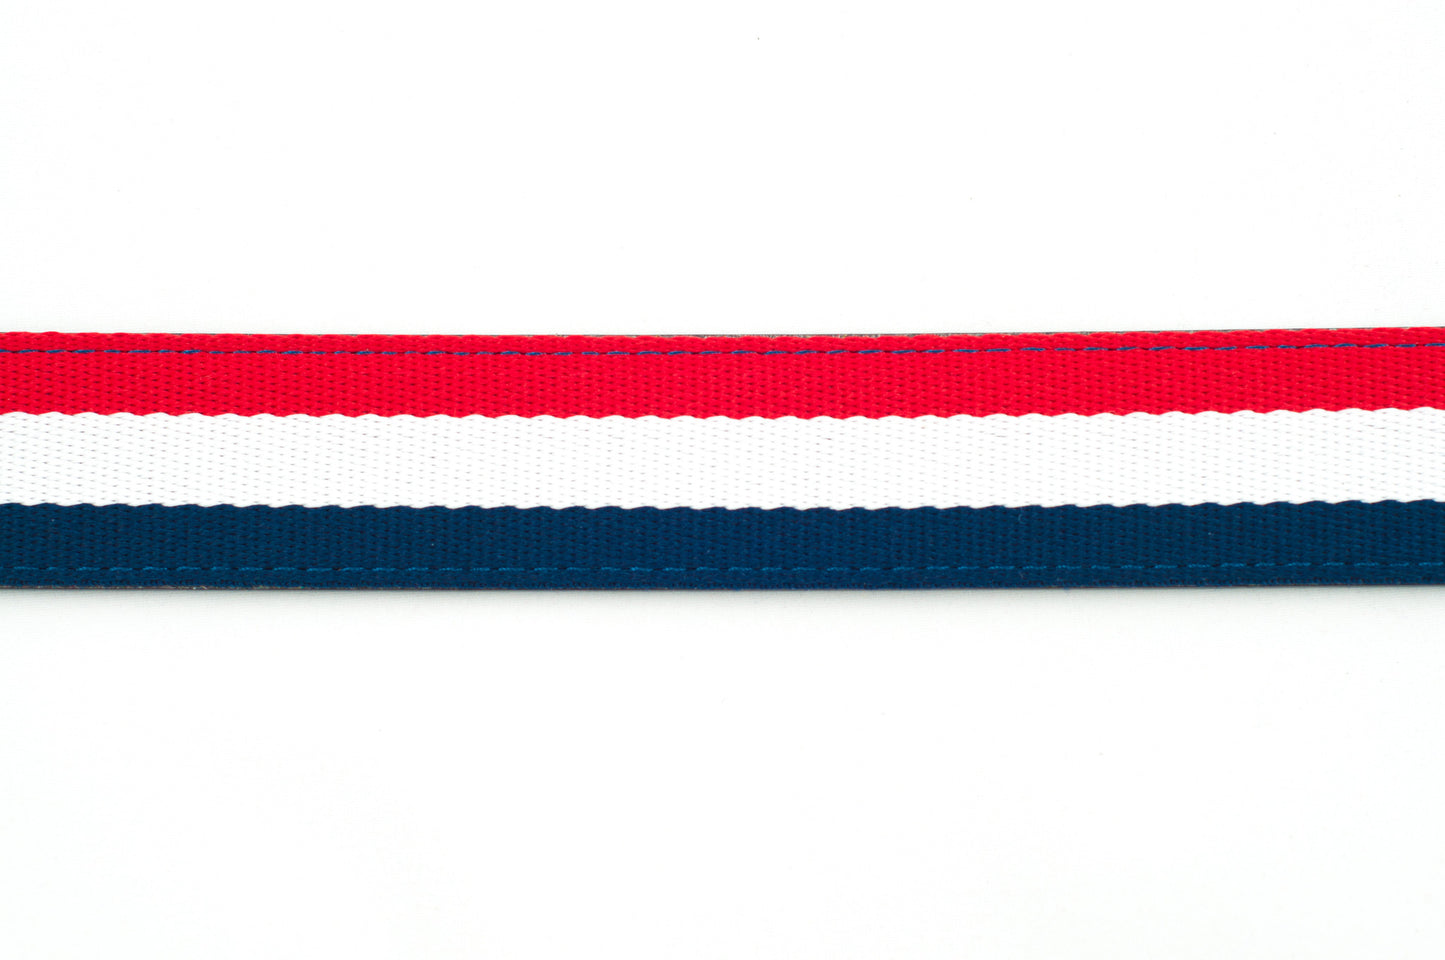 Men's cloth belt strap in red-white-blue with a 1.25-inch width, casual look, stitching close up